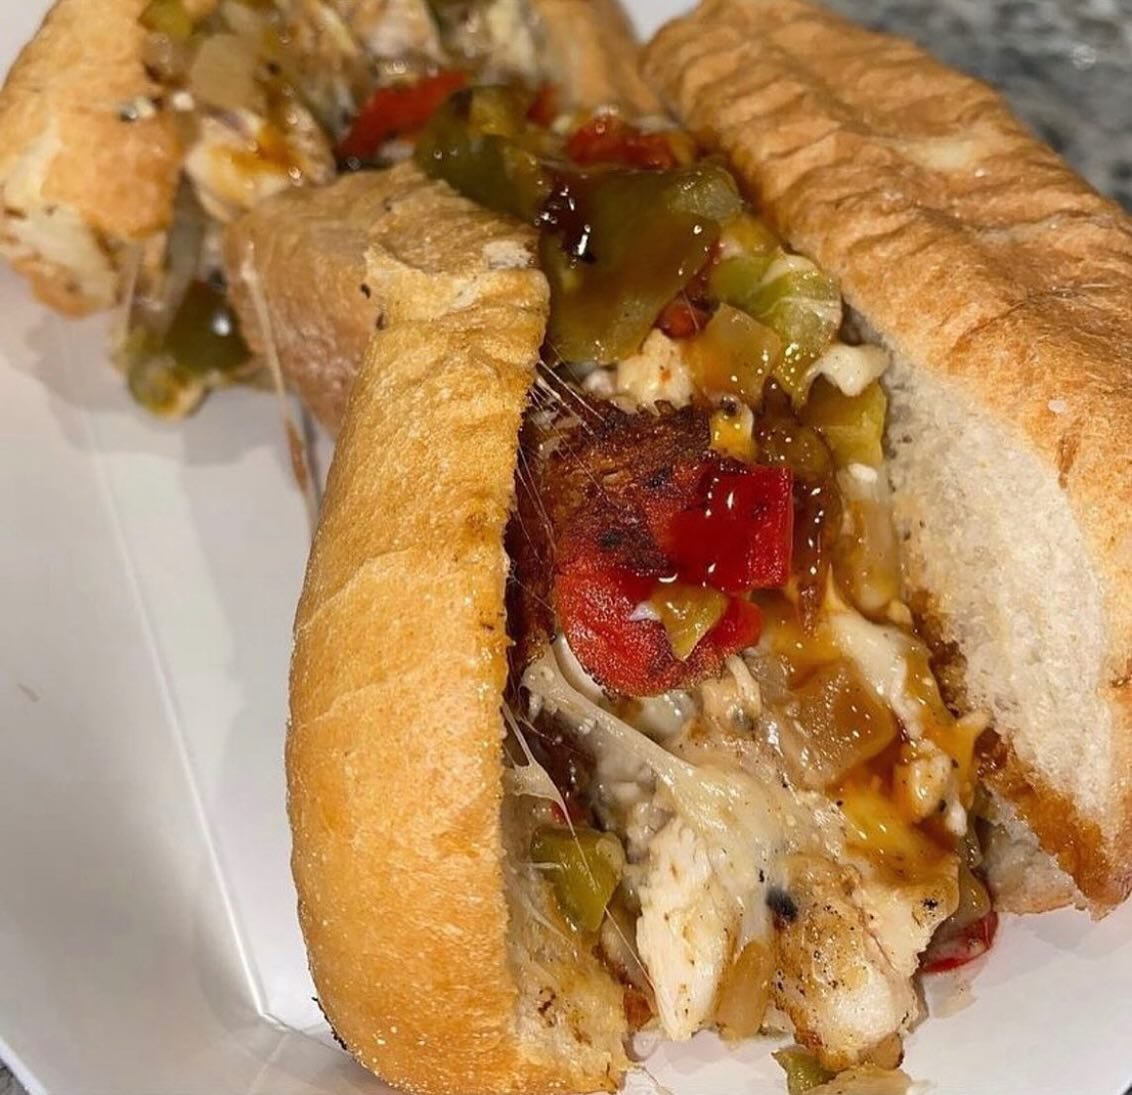 Start your Monday off right with a hoagie from @steaksandhoagies 11am-10pm!!